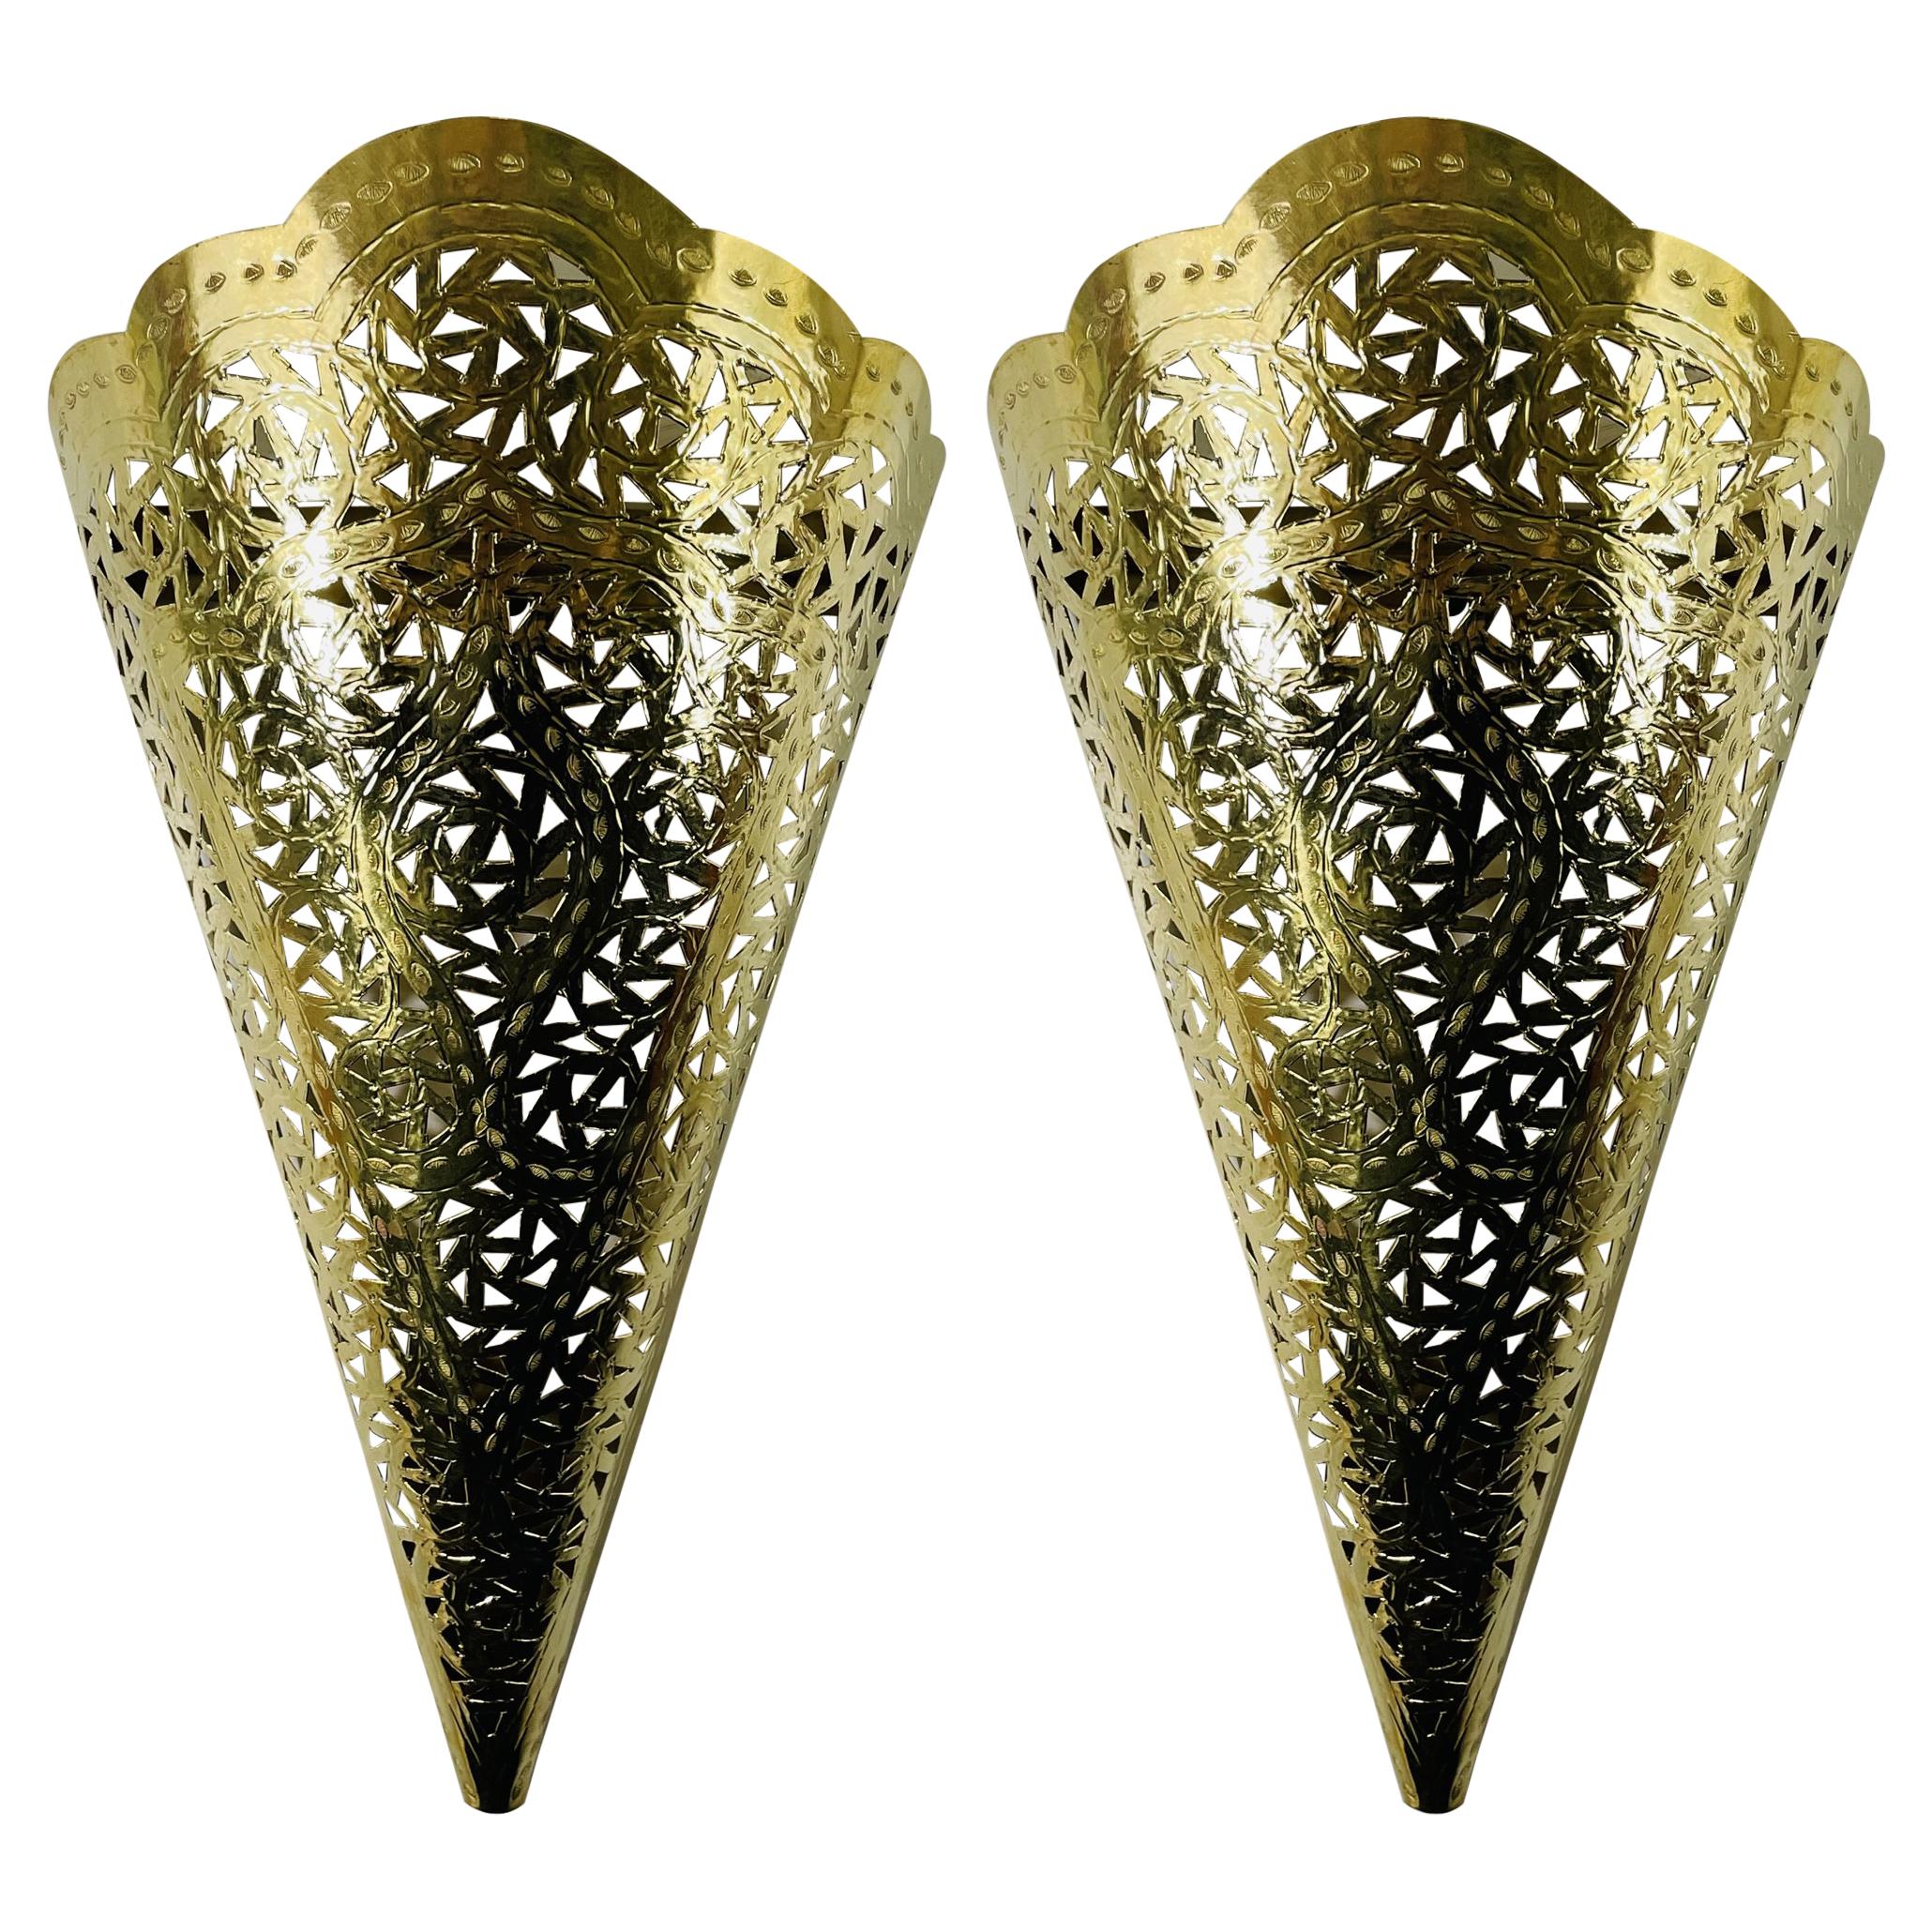 Vintage Moroccan Moorish Brass Cone Shaped Wall Sconce Shade, a Pair